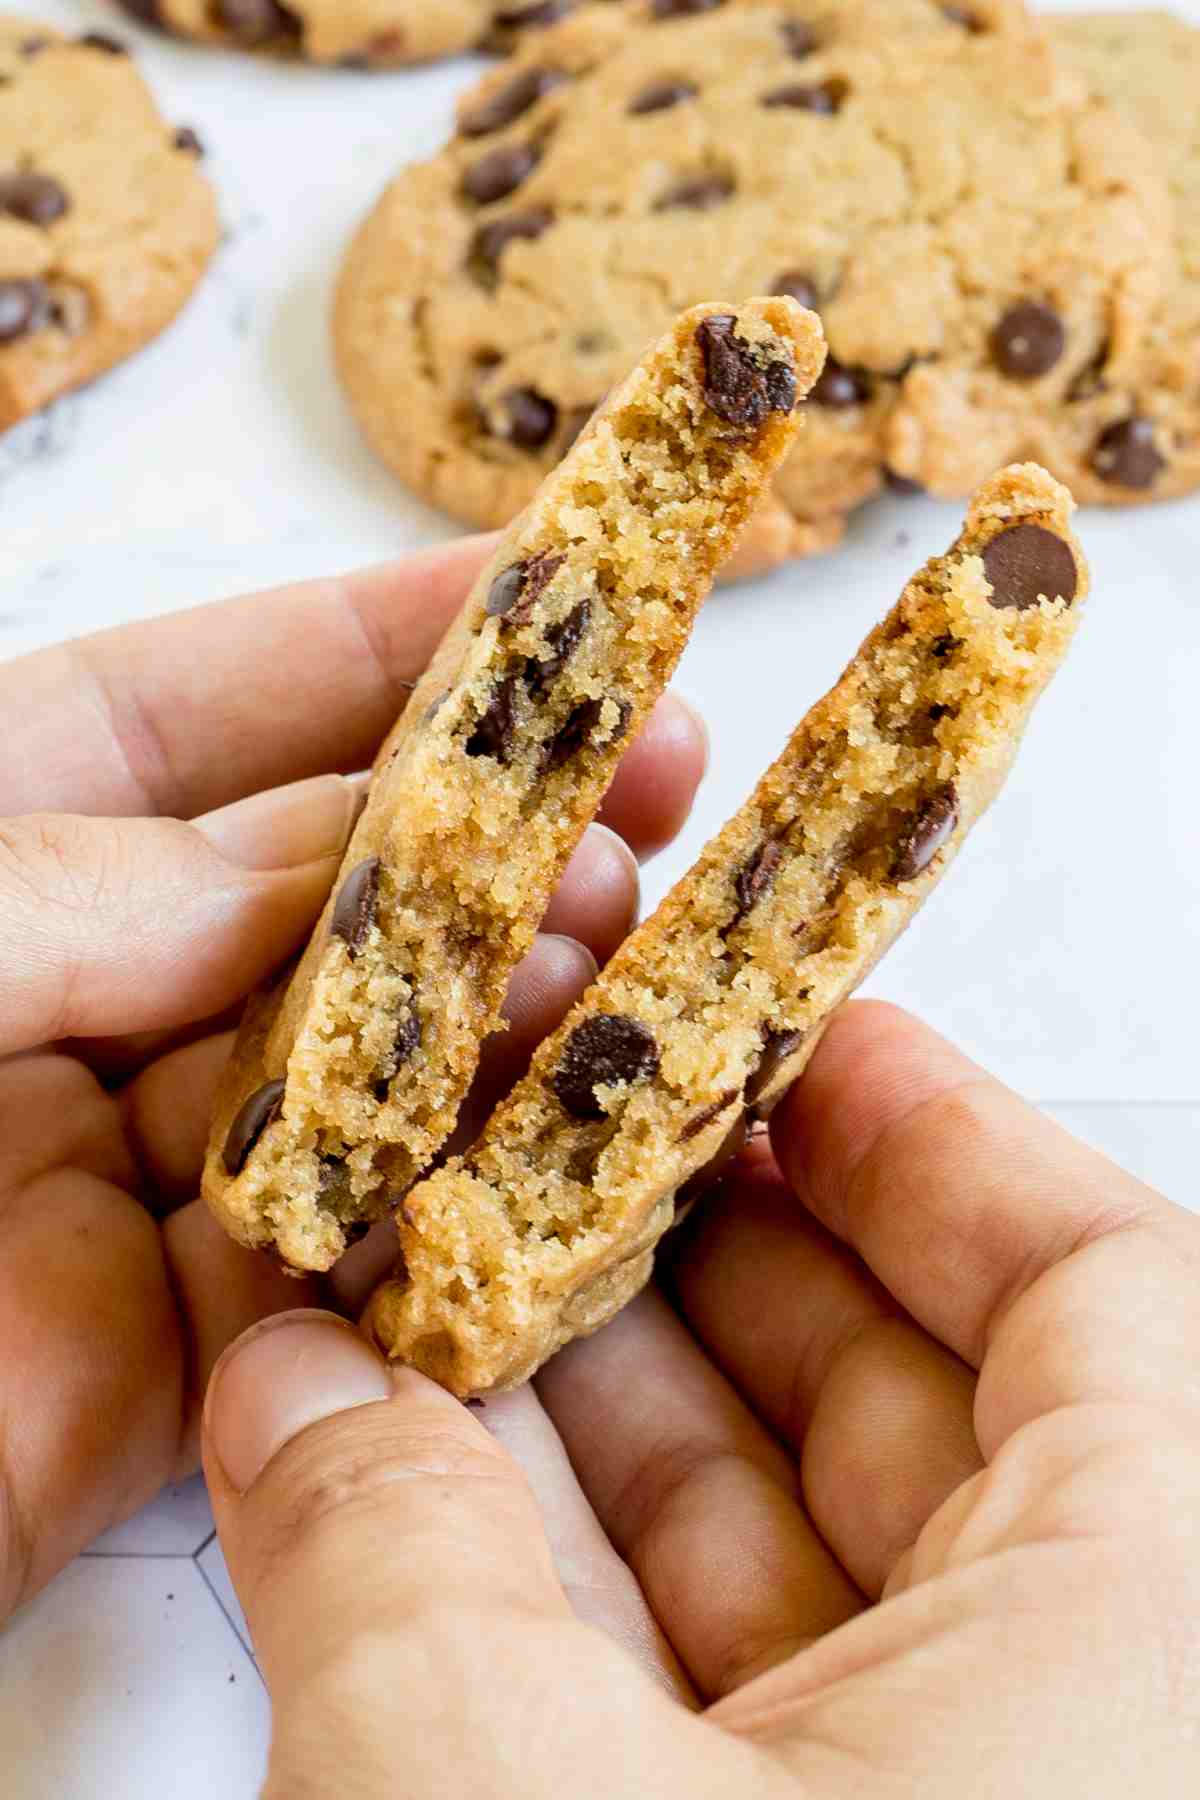 A hand is breaking a chocolate chip cookie in the middle. More cookies are in the background.